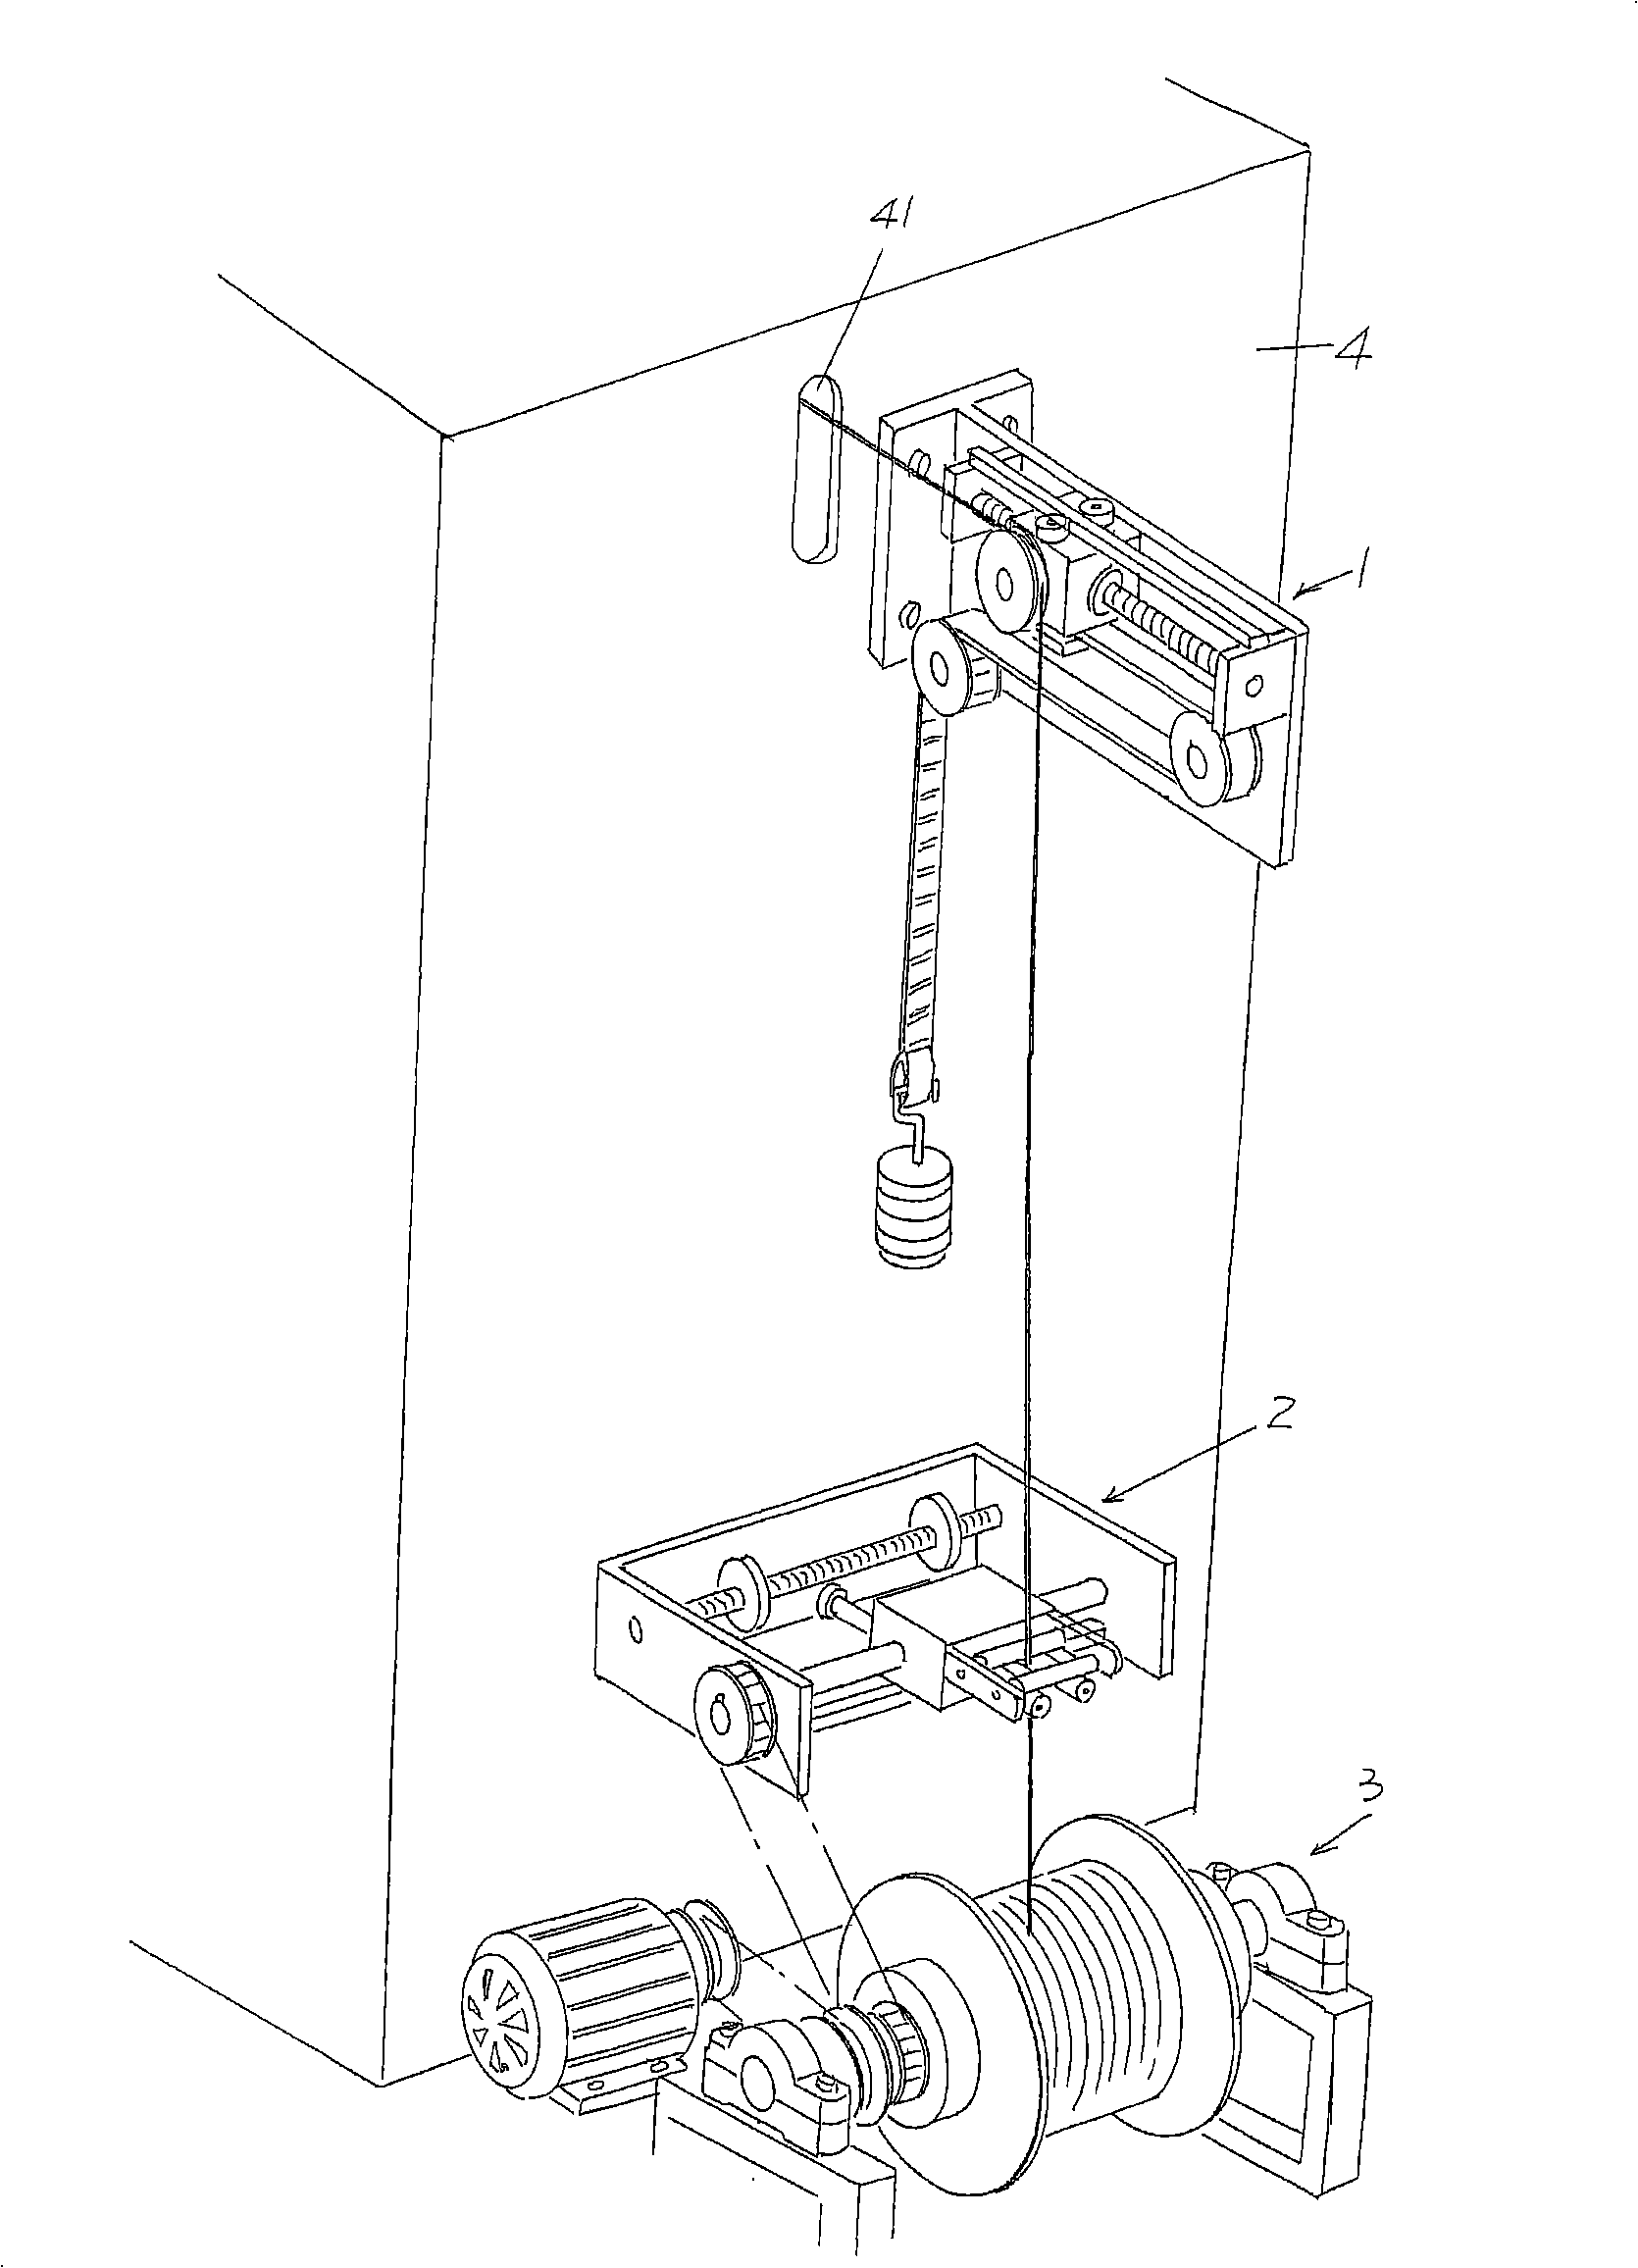 Wire-drawing mechanism for woven wire